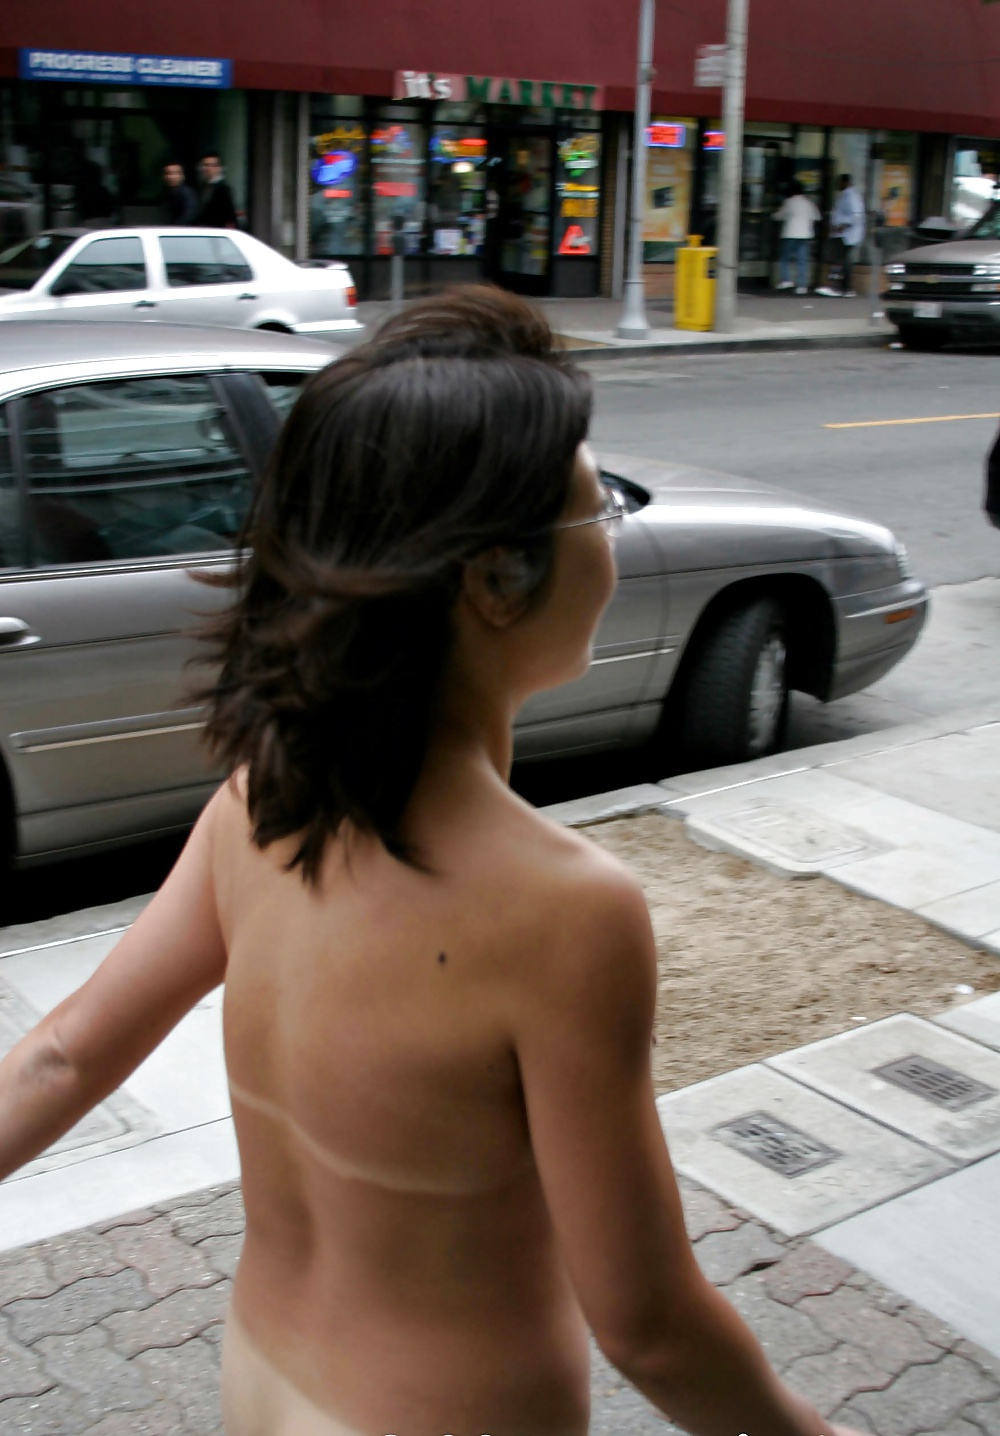 A naked walk in the city. #26598360